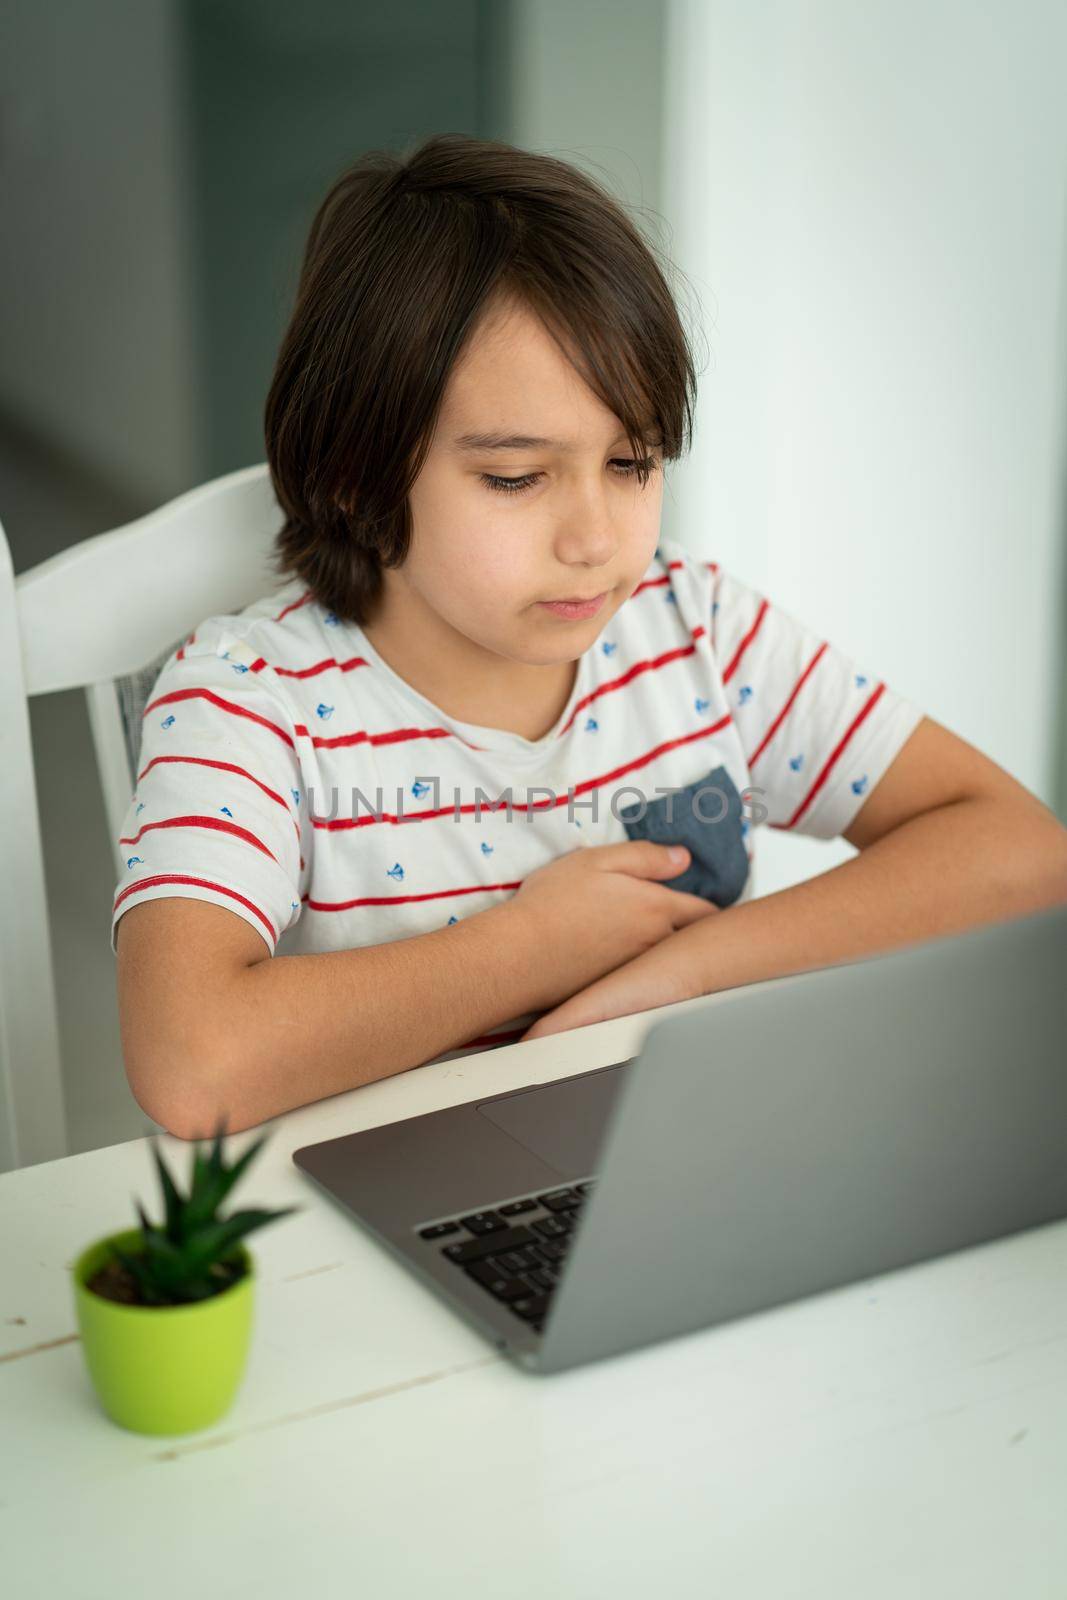 Child using laptop at home, high quality photo by Zurijeta